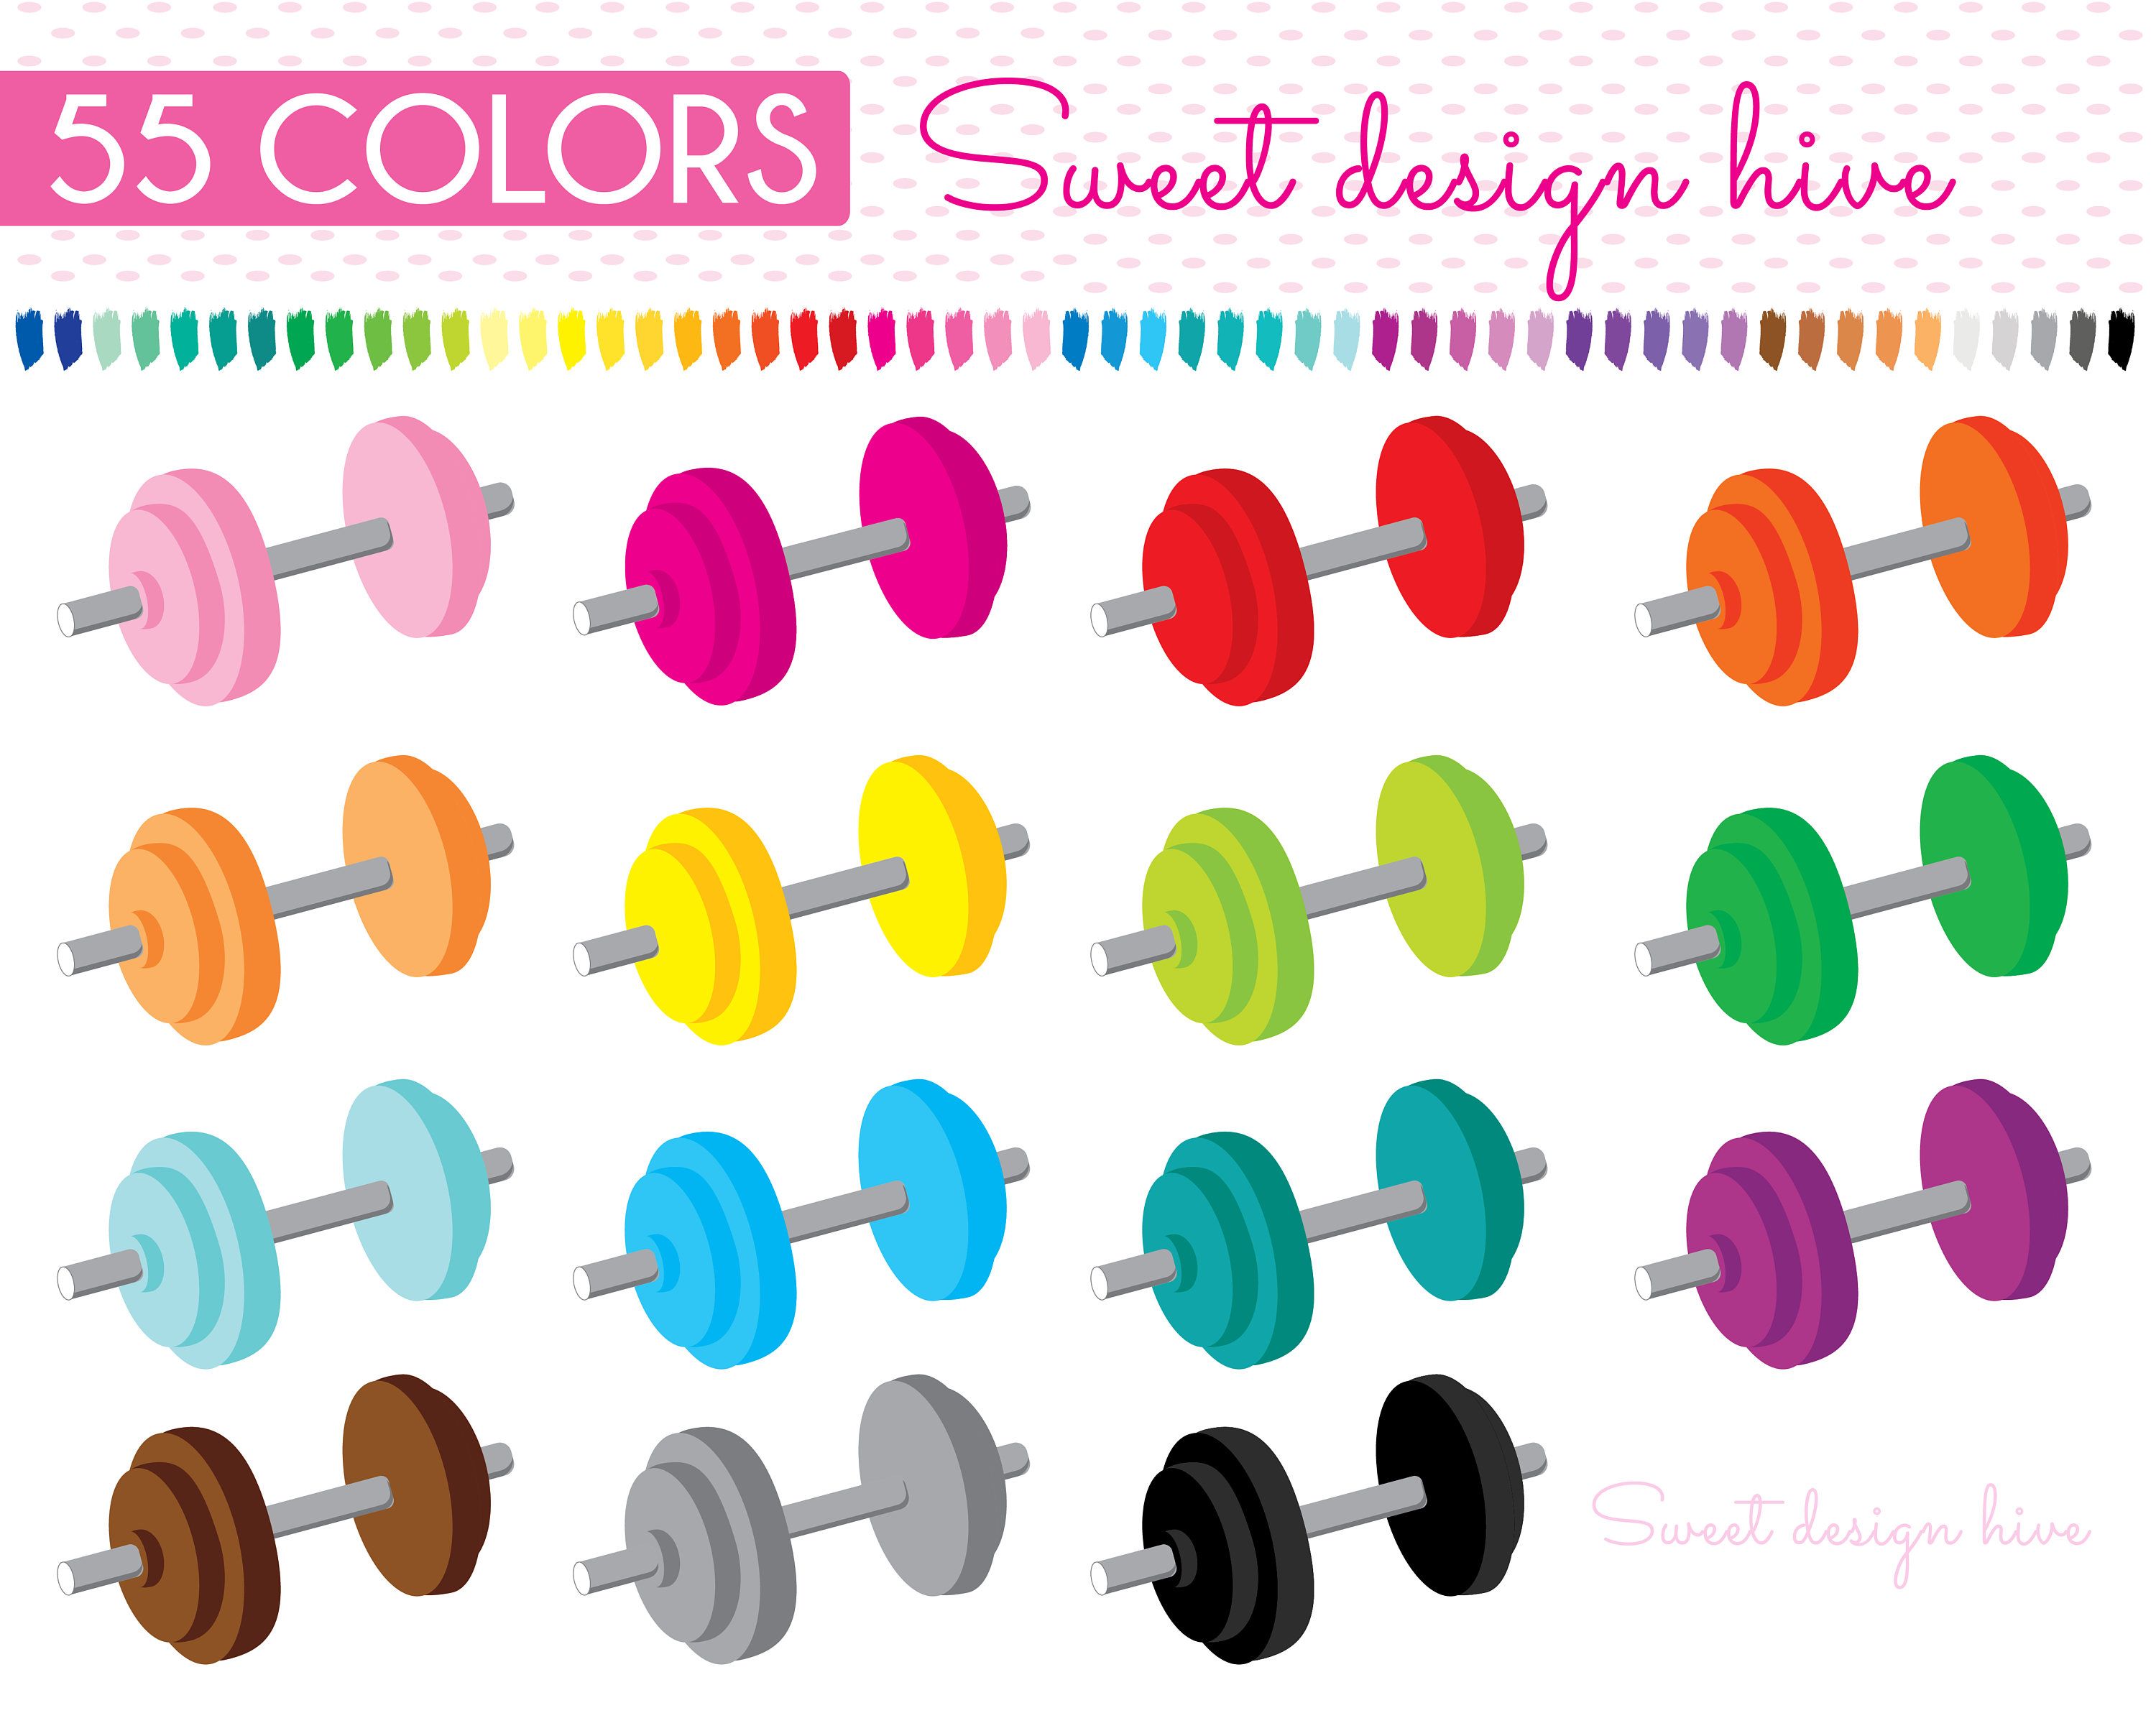 Dumbbell weights fitness . Dumbbells clipart gym equipment